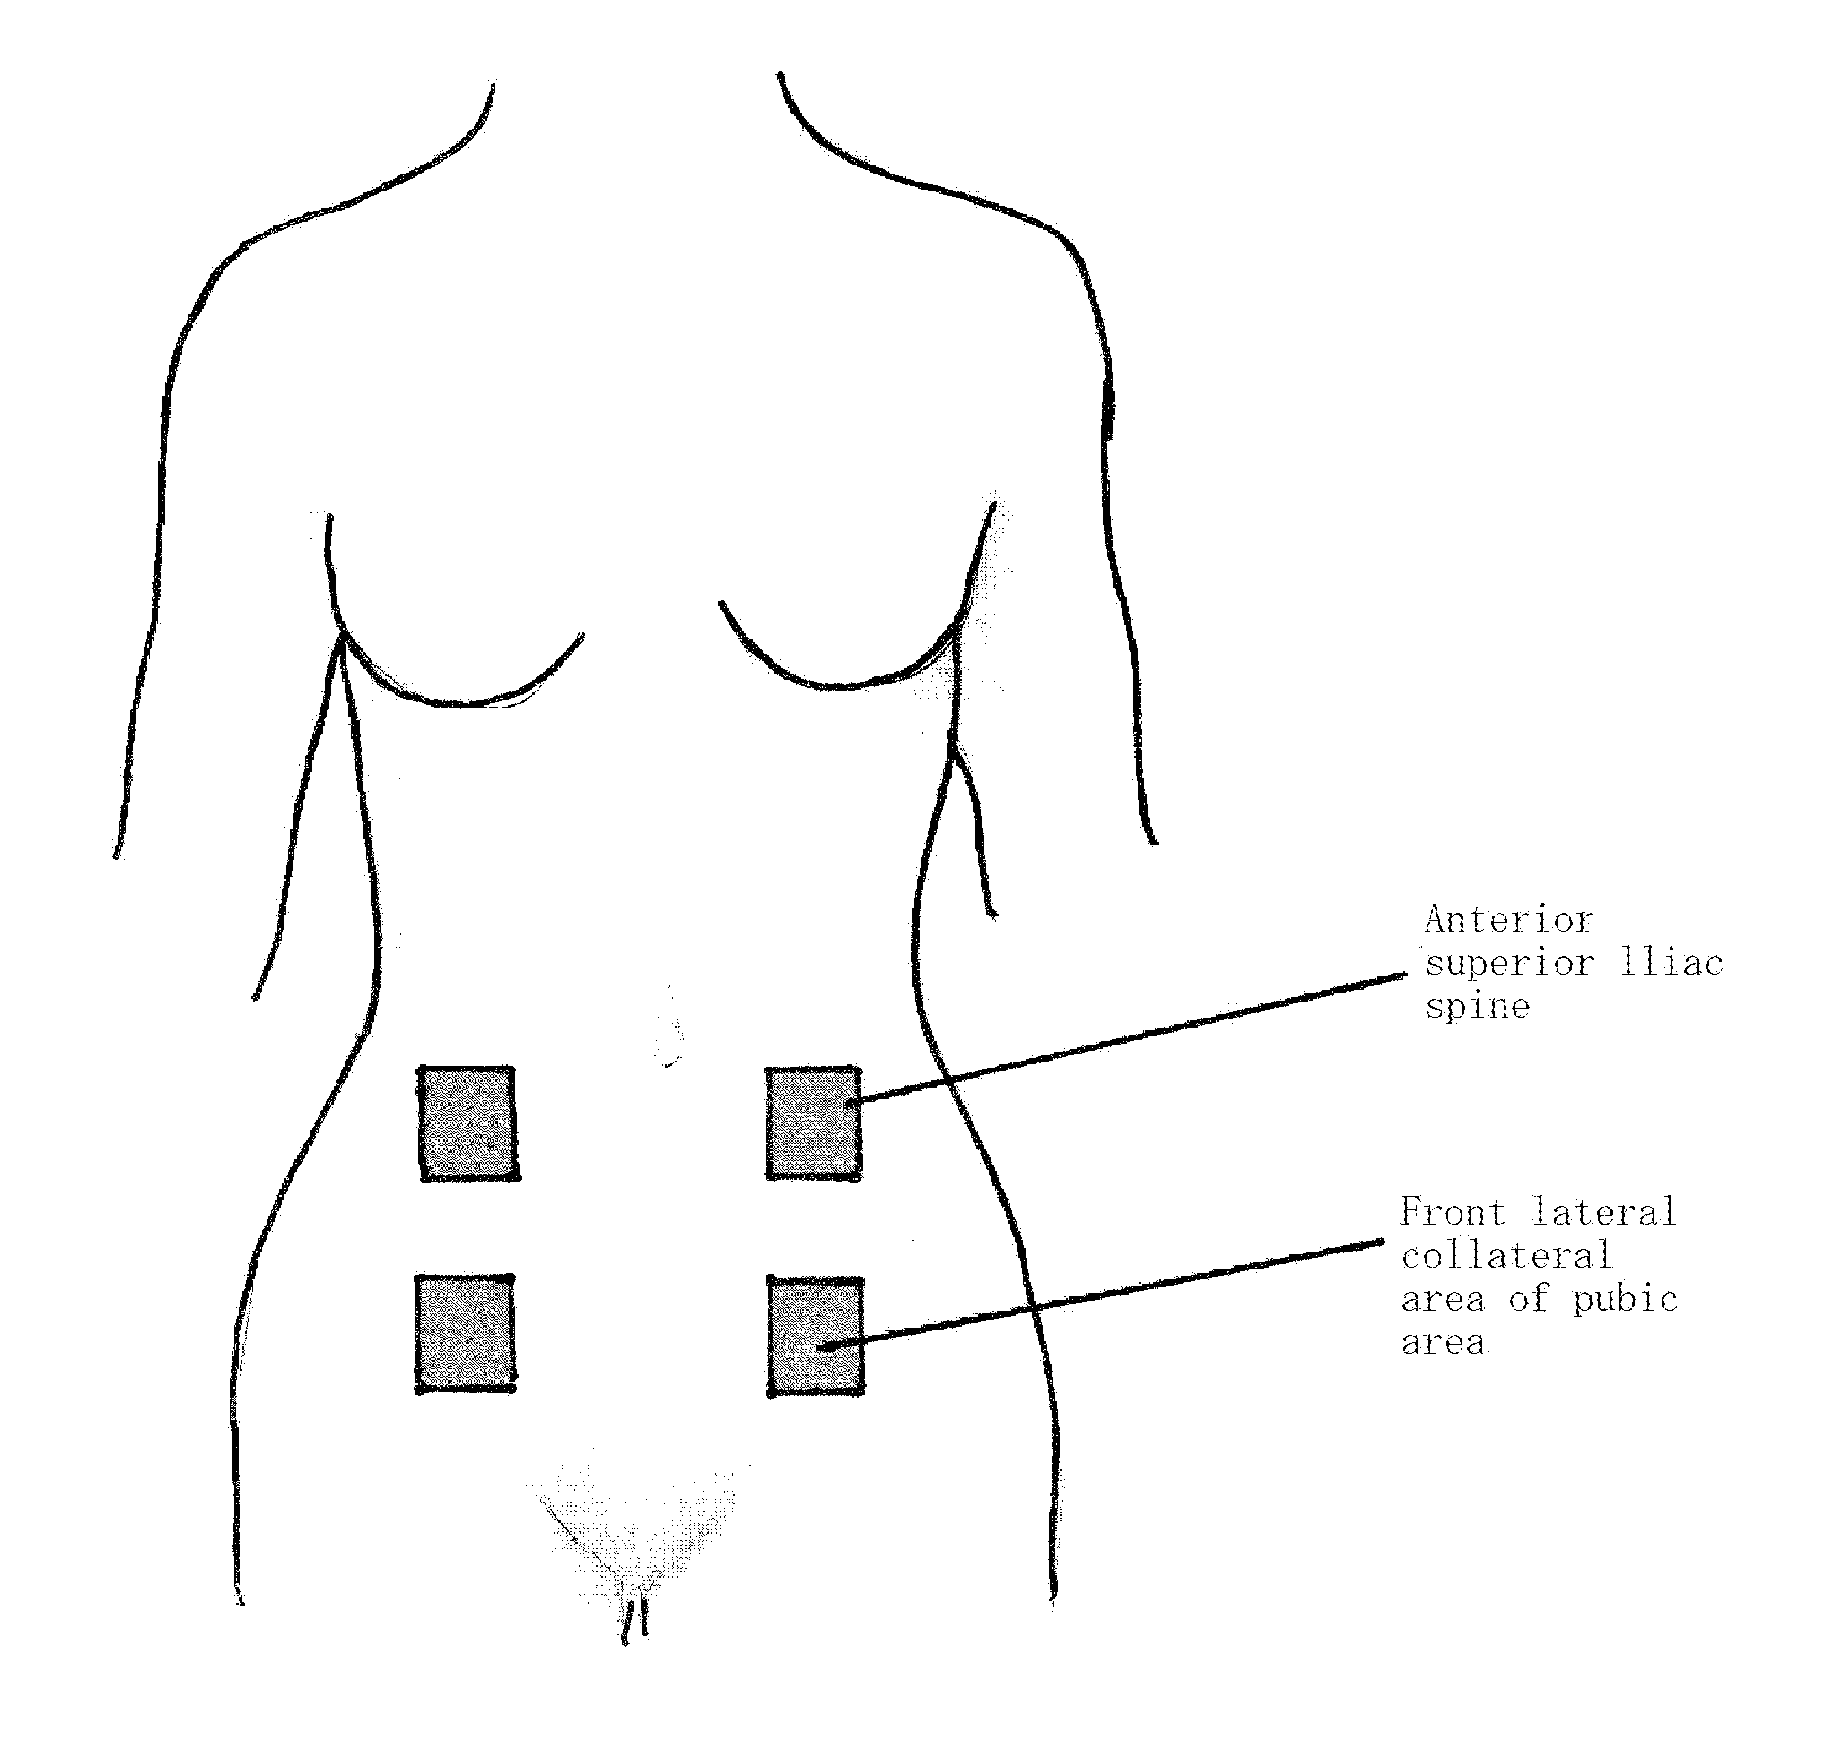 Portable combined stimulation device for alleviating menstrual pain